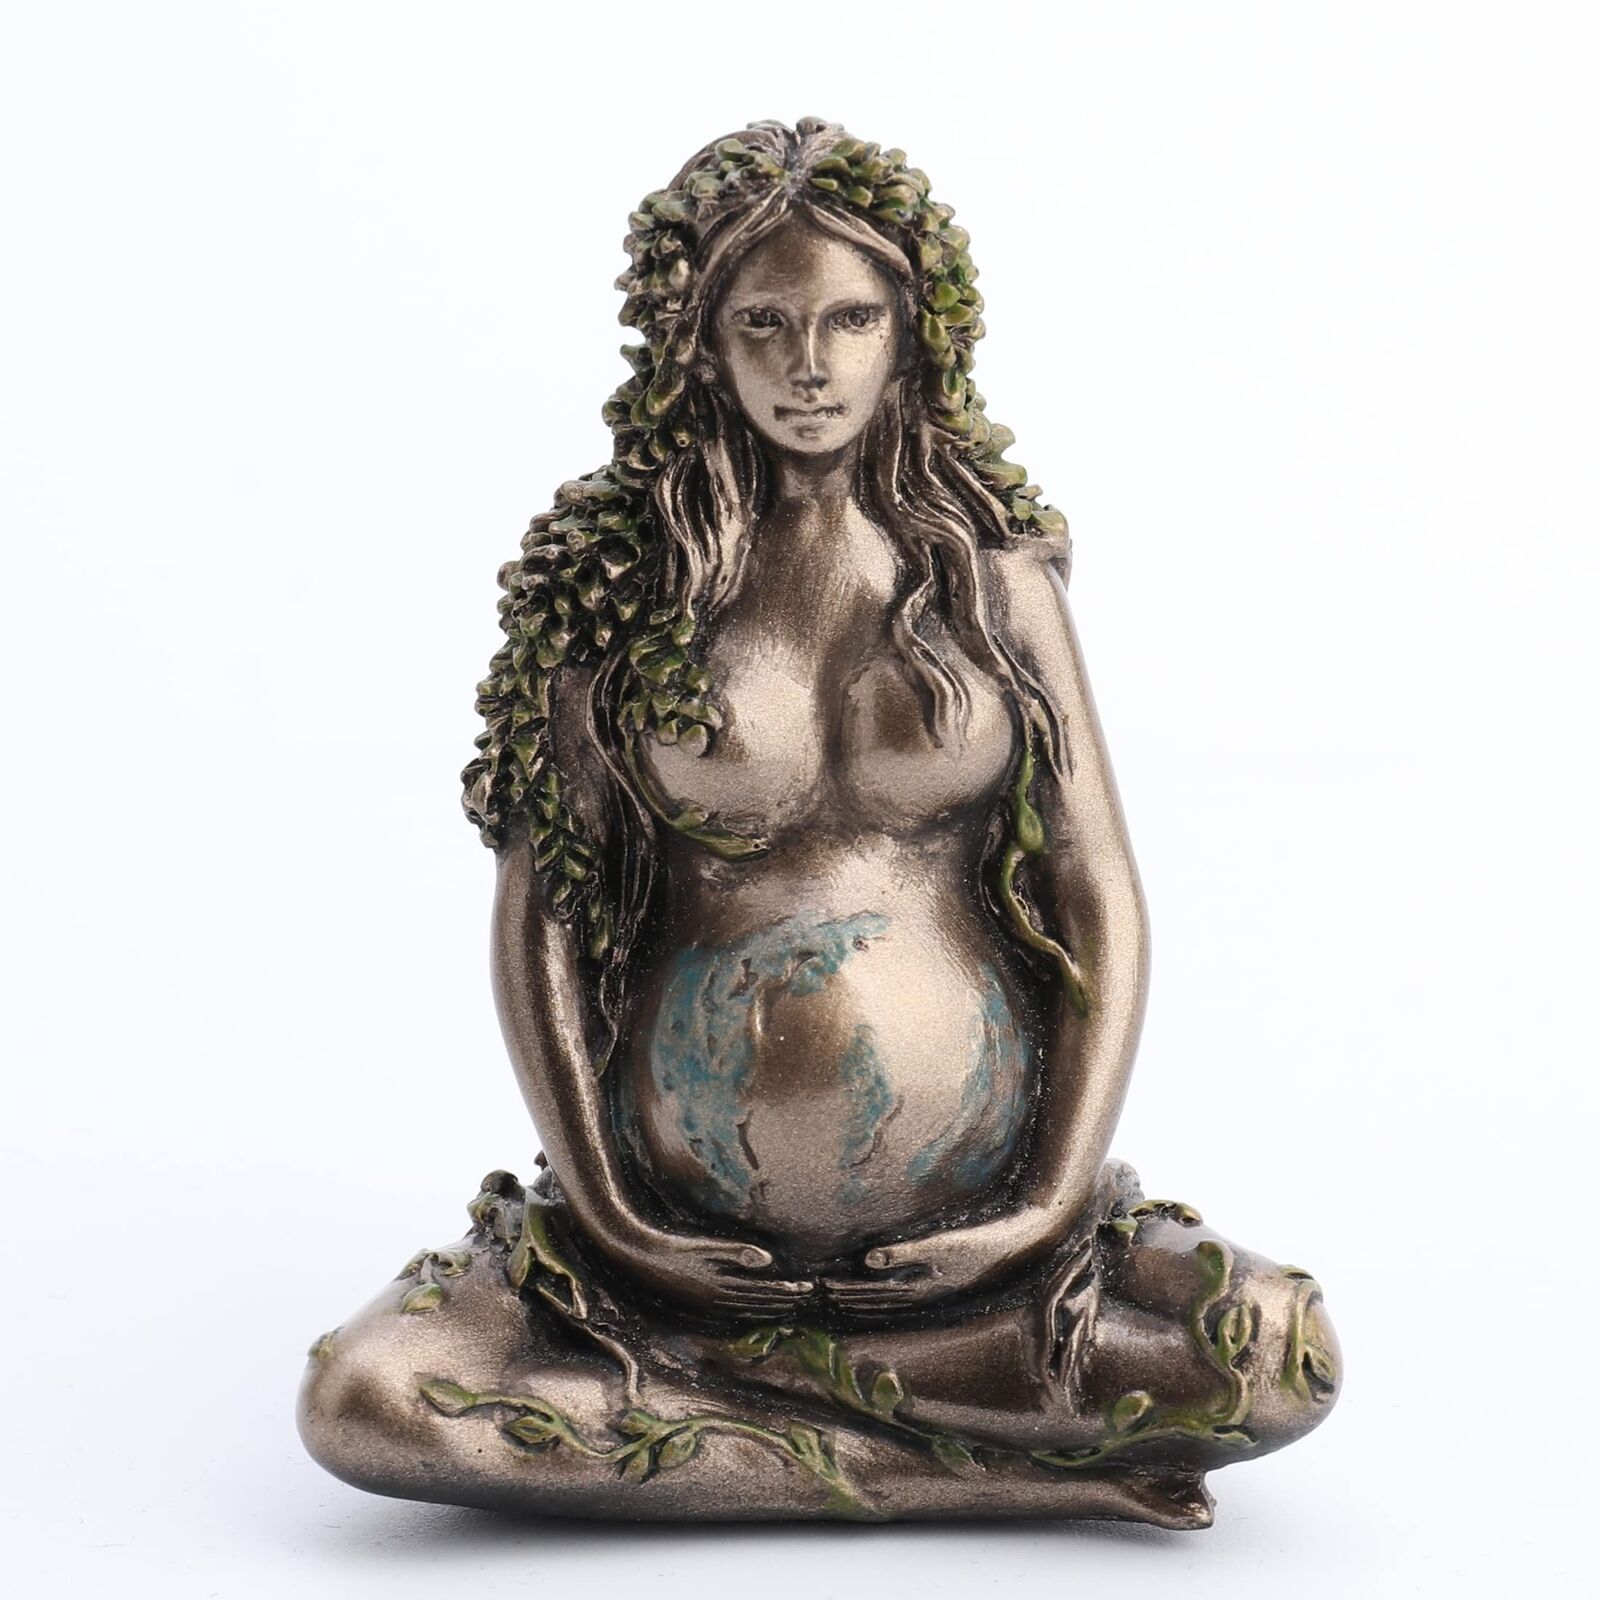 Mother Earth Gaia Sitting Lotus Pose Resin Figurine 2.5 Inch Home Decor Art Gift